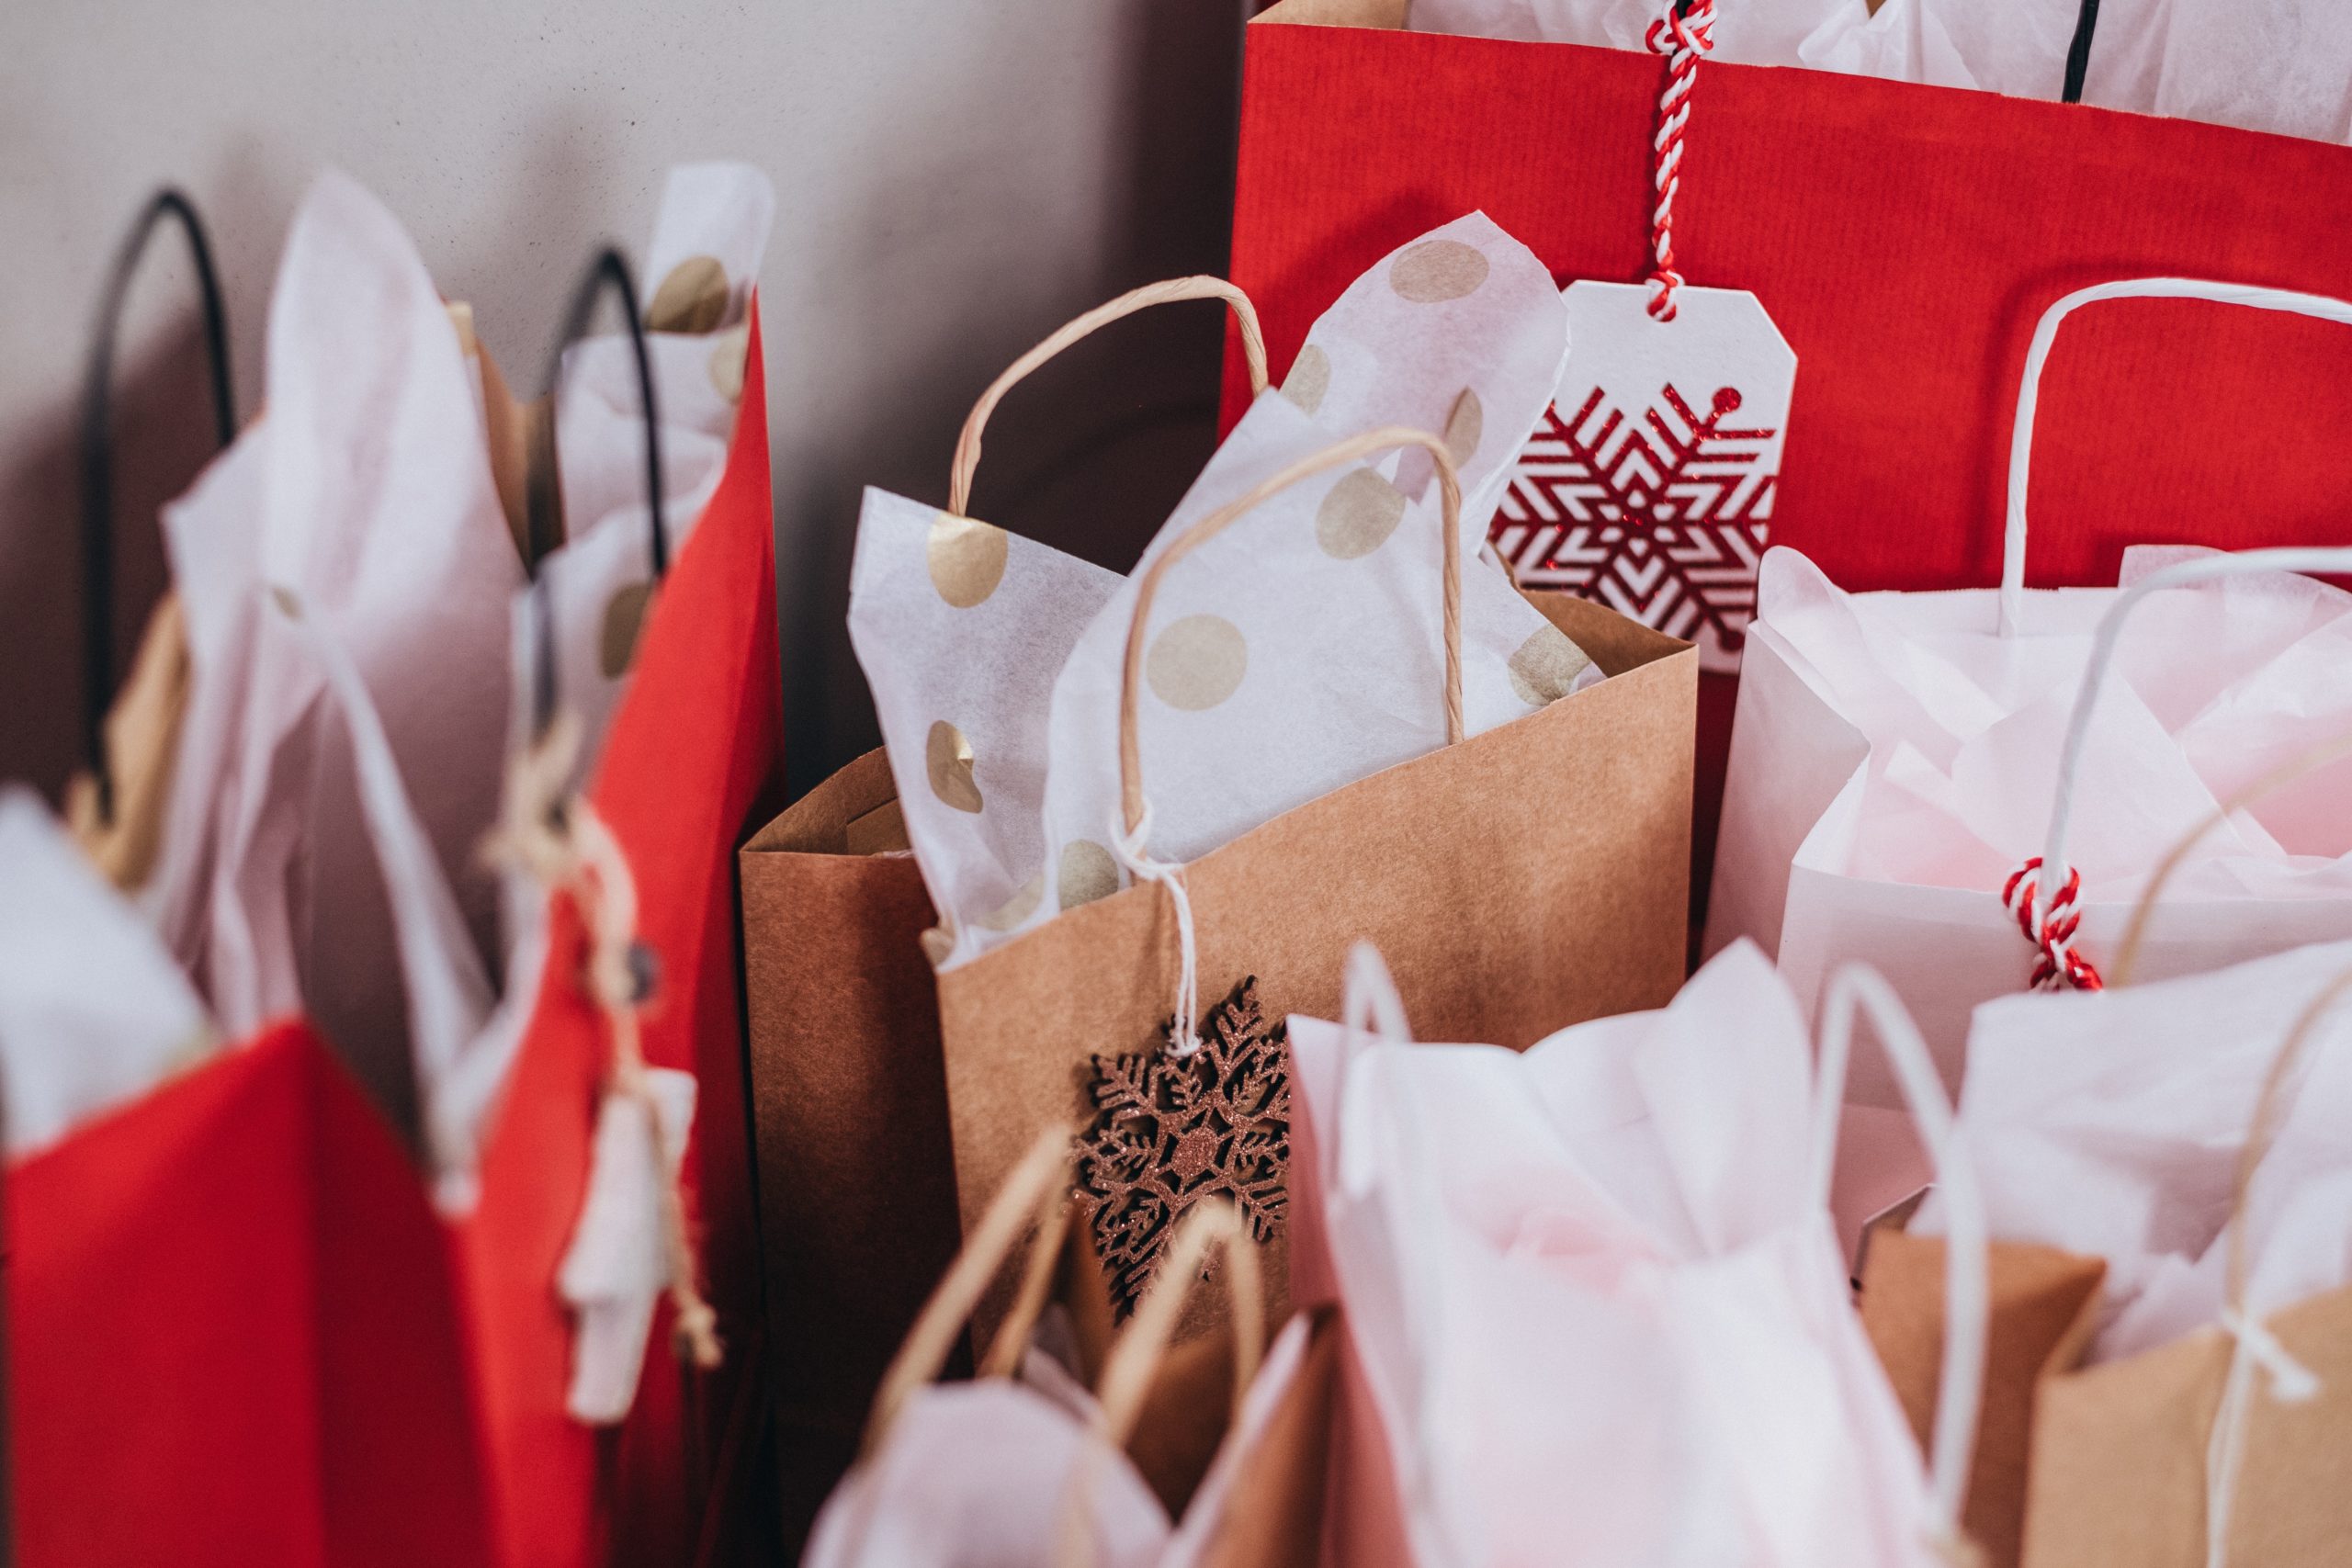 The branded gifts you give during the holiday season can pay back in dividends. Here's how to choose the right items.